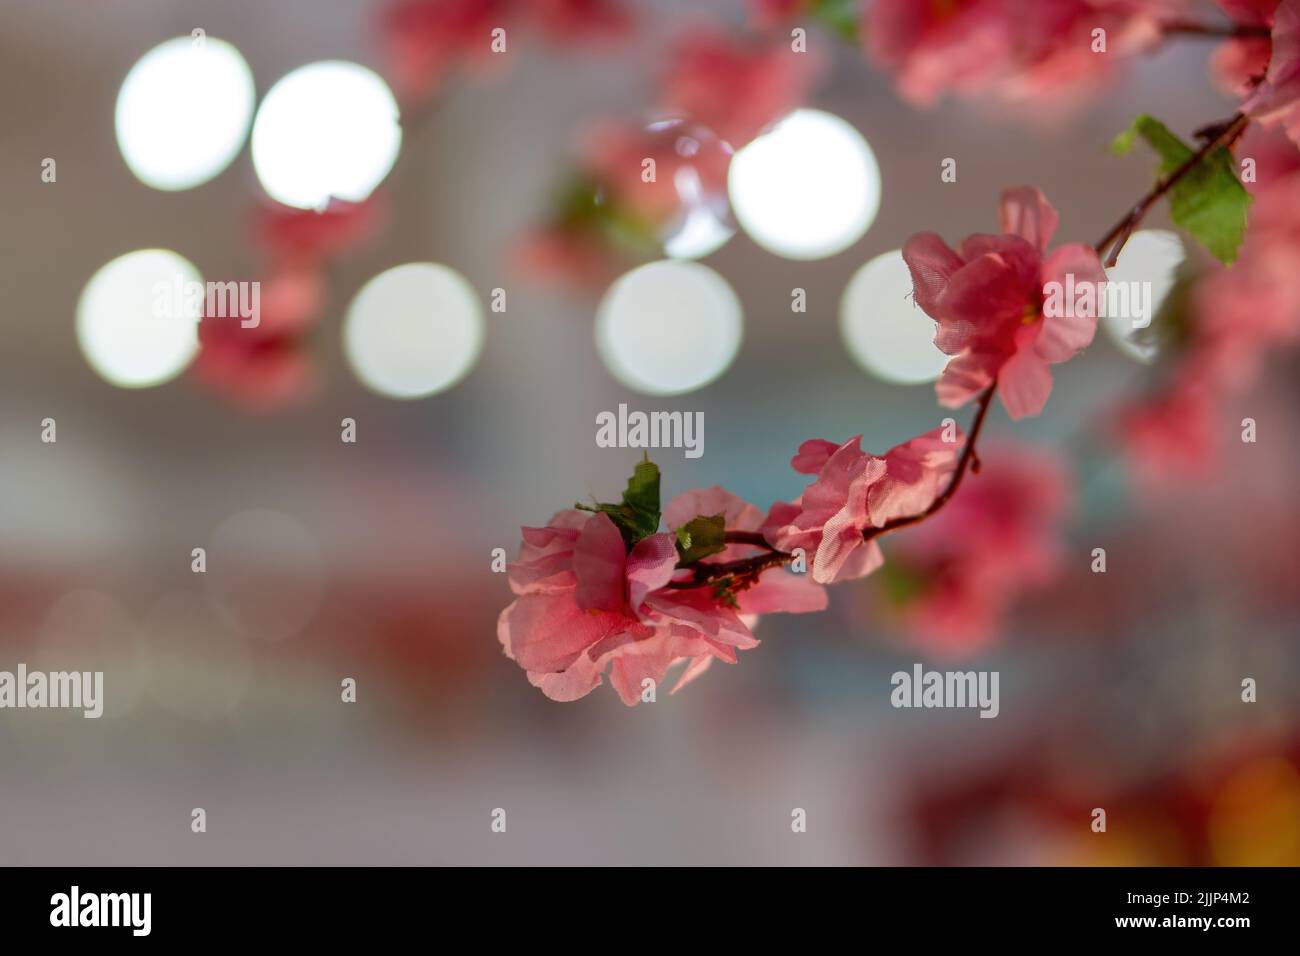 A close-up shot of plum blossom growing in a blurry background. Stock Photo